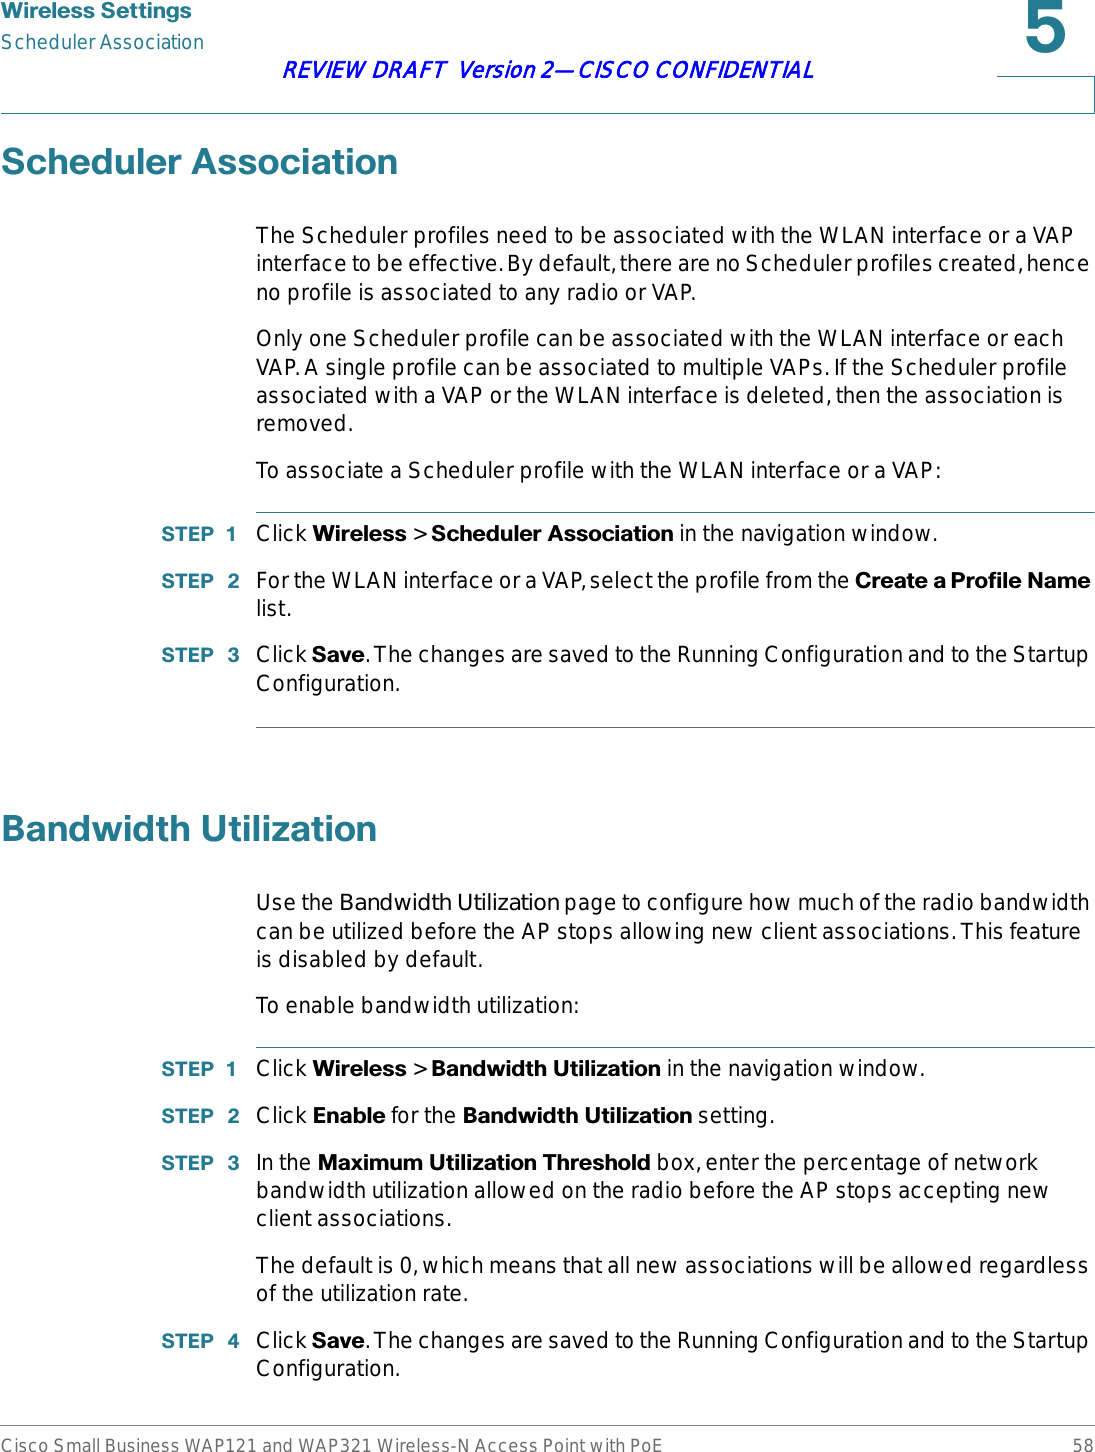 :LUHOHVV6HWWLQJVScheduler AssociationCisco Small Business WAP121 and WAP321 Wireless-N Access Point with PoE 58REVIEW DRAFT  Version 2—CISCO CONFIDENTIAL6FKHGXOHU$VVRFLDWLRQThe Scheduler profiles need to be associated with the WLAN interface or a VAP interface to be effective. By default, there are no Scheduler profiles created, hence no profile is associated to any radio or VAP. Only one Scheduler profile can be associated with the WLAN interface or each VAP. A single profile can be associated to multiple VAPs. If the Scheduler profile associated with a VAP or the WLAN interface is deleted, then the association is removed.To associate a Scheduler profile with the WLAN interface or a VAP:67(3  Click :LUHOHVV &gt; 6FKHGXOHU$VVRFLDWLRQ in the navigation window.67(3  For the WLAN interface or a VAP, select the profile from the &amp;UHDWHD3URILOH1DPHlist.67(3  Click 6DYH. The changes are saved to the Running Configuration and to the Startup Configuration.%DQGZLGWK8WLOL]DWLRQUse the Bandwidth Utilization page to configure how much of the radio bandwidth can be utilized before the AP stops allowing new client associations. This feature is disabled by default.To enable bandwidth utilization:67(3  Click :LUHOHVV &gt; %DQGZLGWK8WLOL]DWLRQin the navigation window.67(3  Click (QDEOH for the %DQGZLGWK8WLOL]DWLRQ setting. 67(3  In the 0D[LPXP8WLOL]DWLRQ7KUHVKROG box, enter the percentage of network bandwidth utilization allowed on the radio before the AP stops accepting new client associations.The default is 0, which means that all new associations will be allowed regardless of the utilization rate.67(3  Click 6DYH. The changes are saved to the Running Configuration and to the Startup Configuration. 